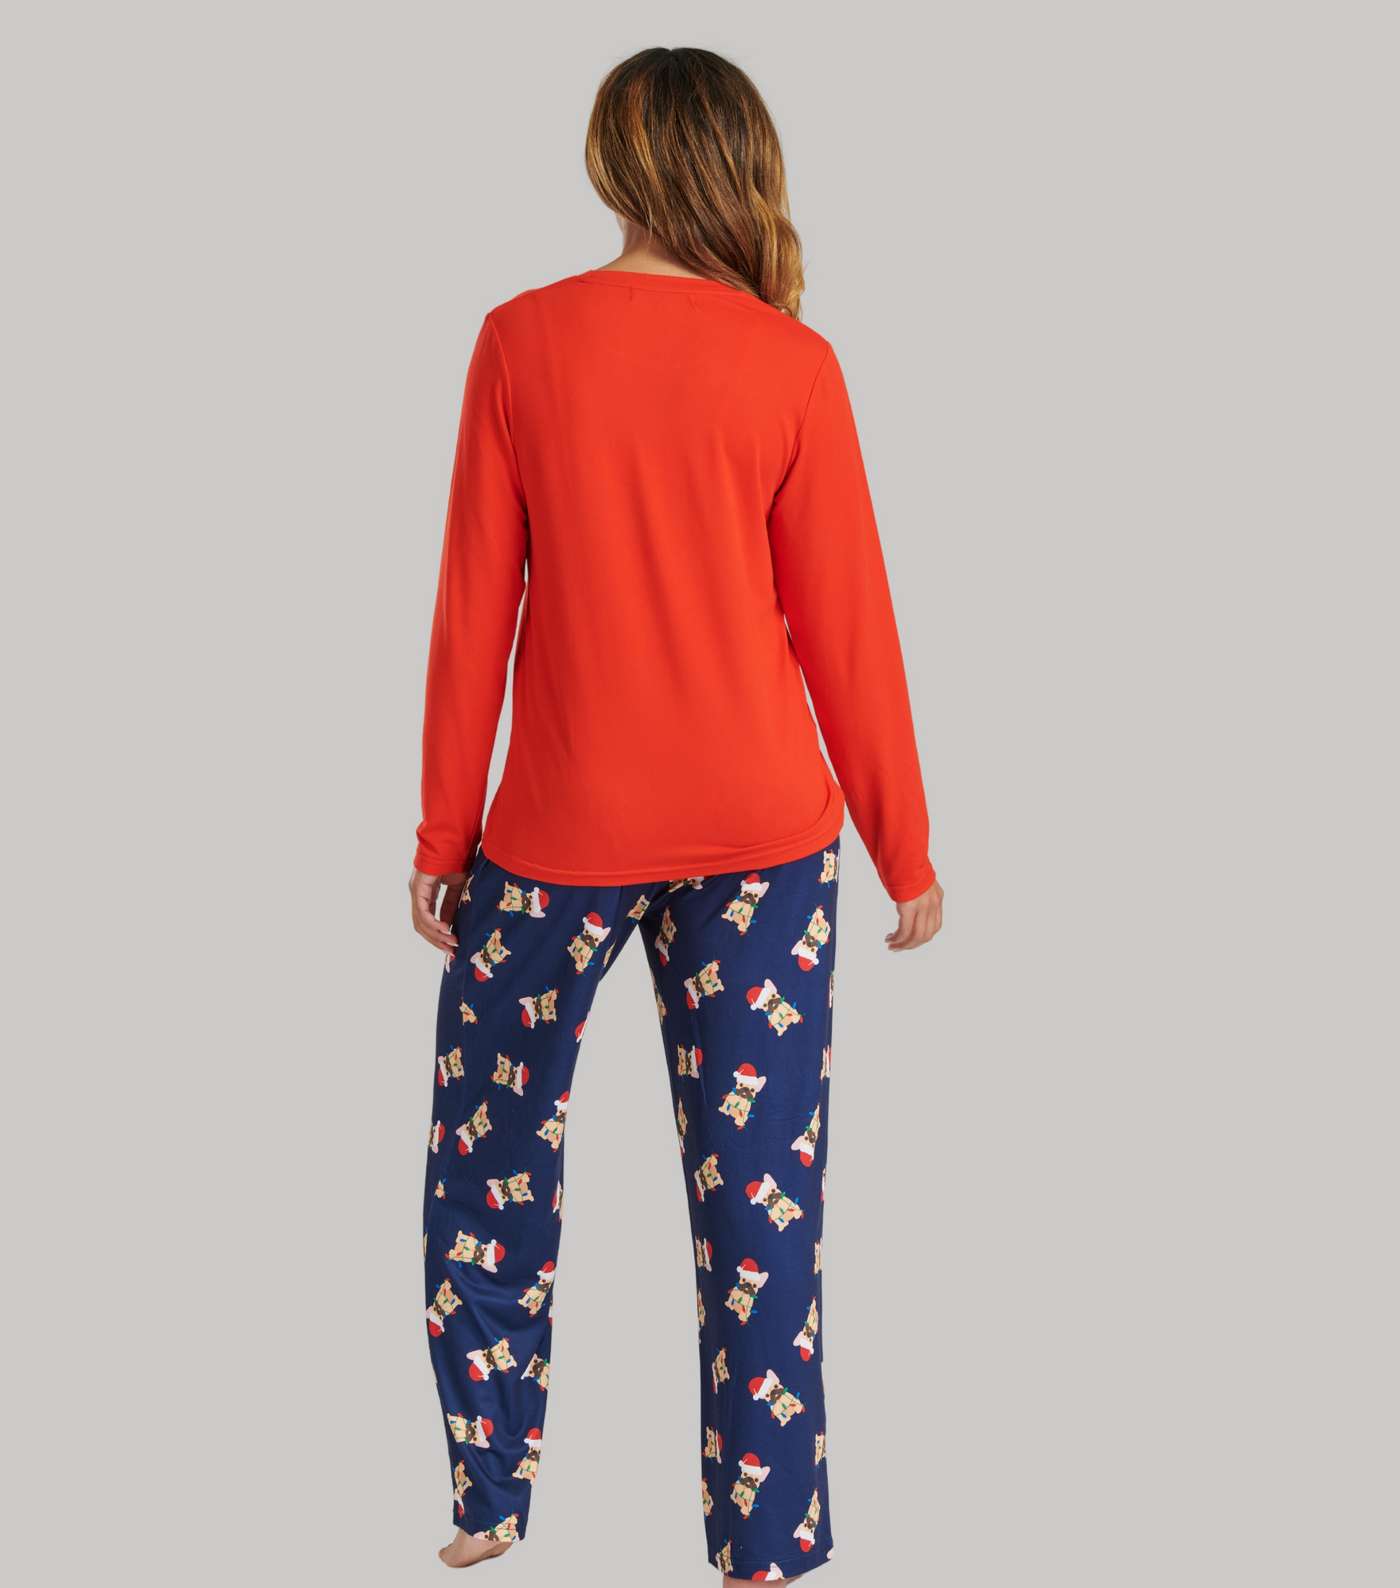 Loungeable Red Trouser Pyjama Set with Christmas Frenchie Print Image 5